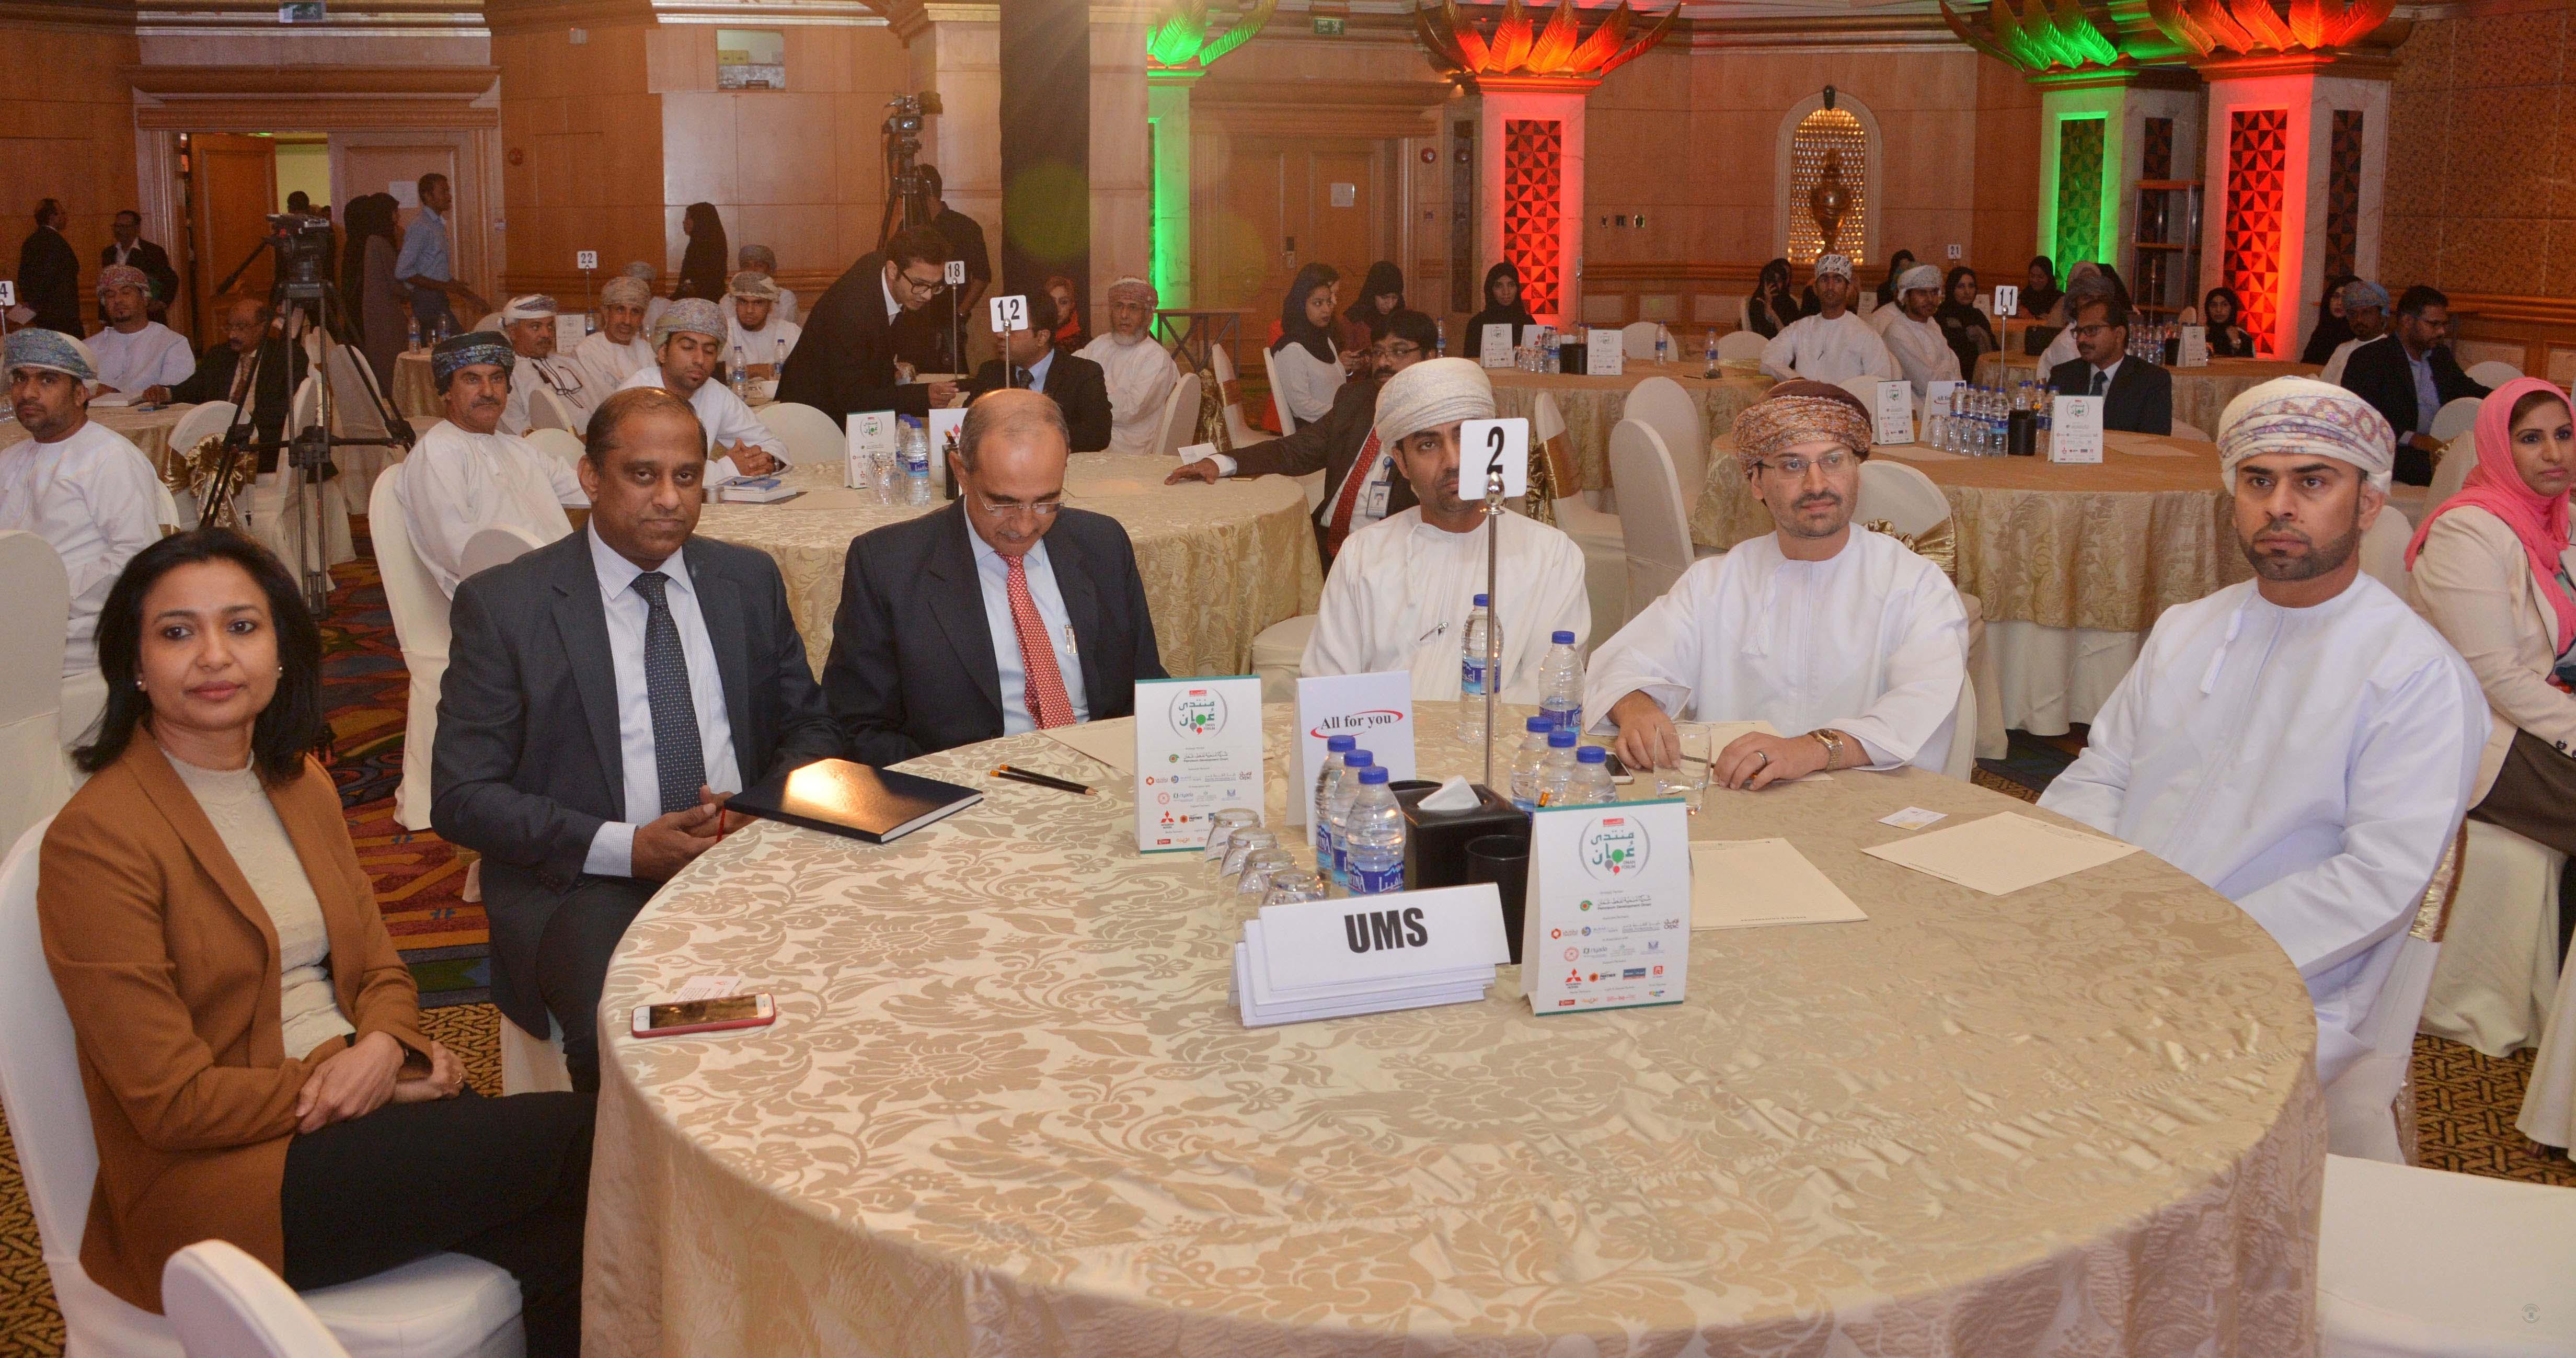 Solutions discussed for challenges to SMEs in Oman